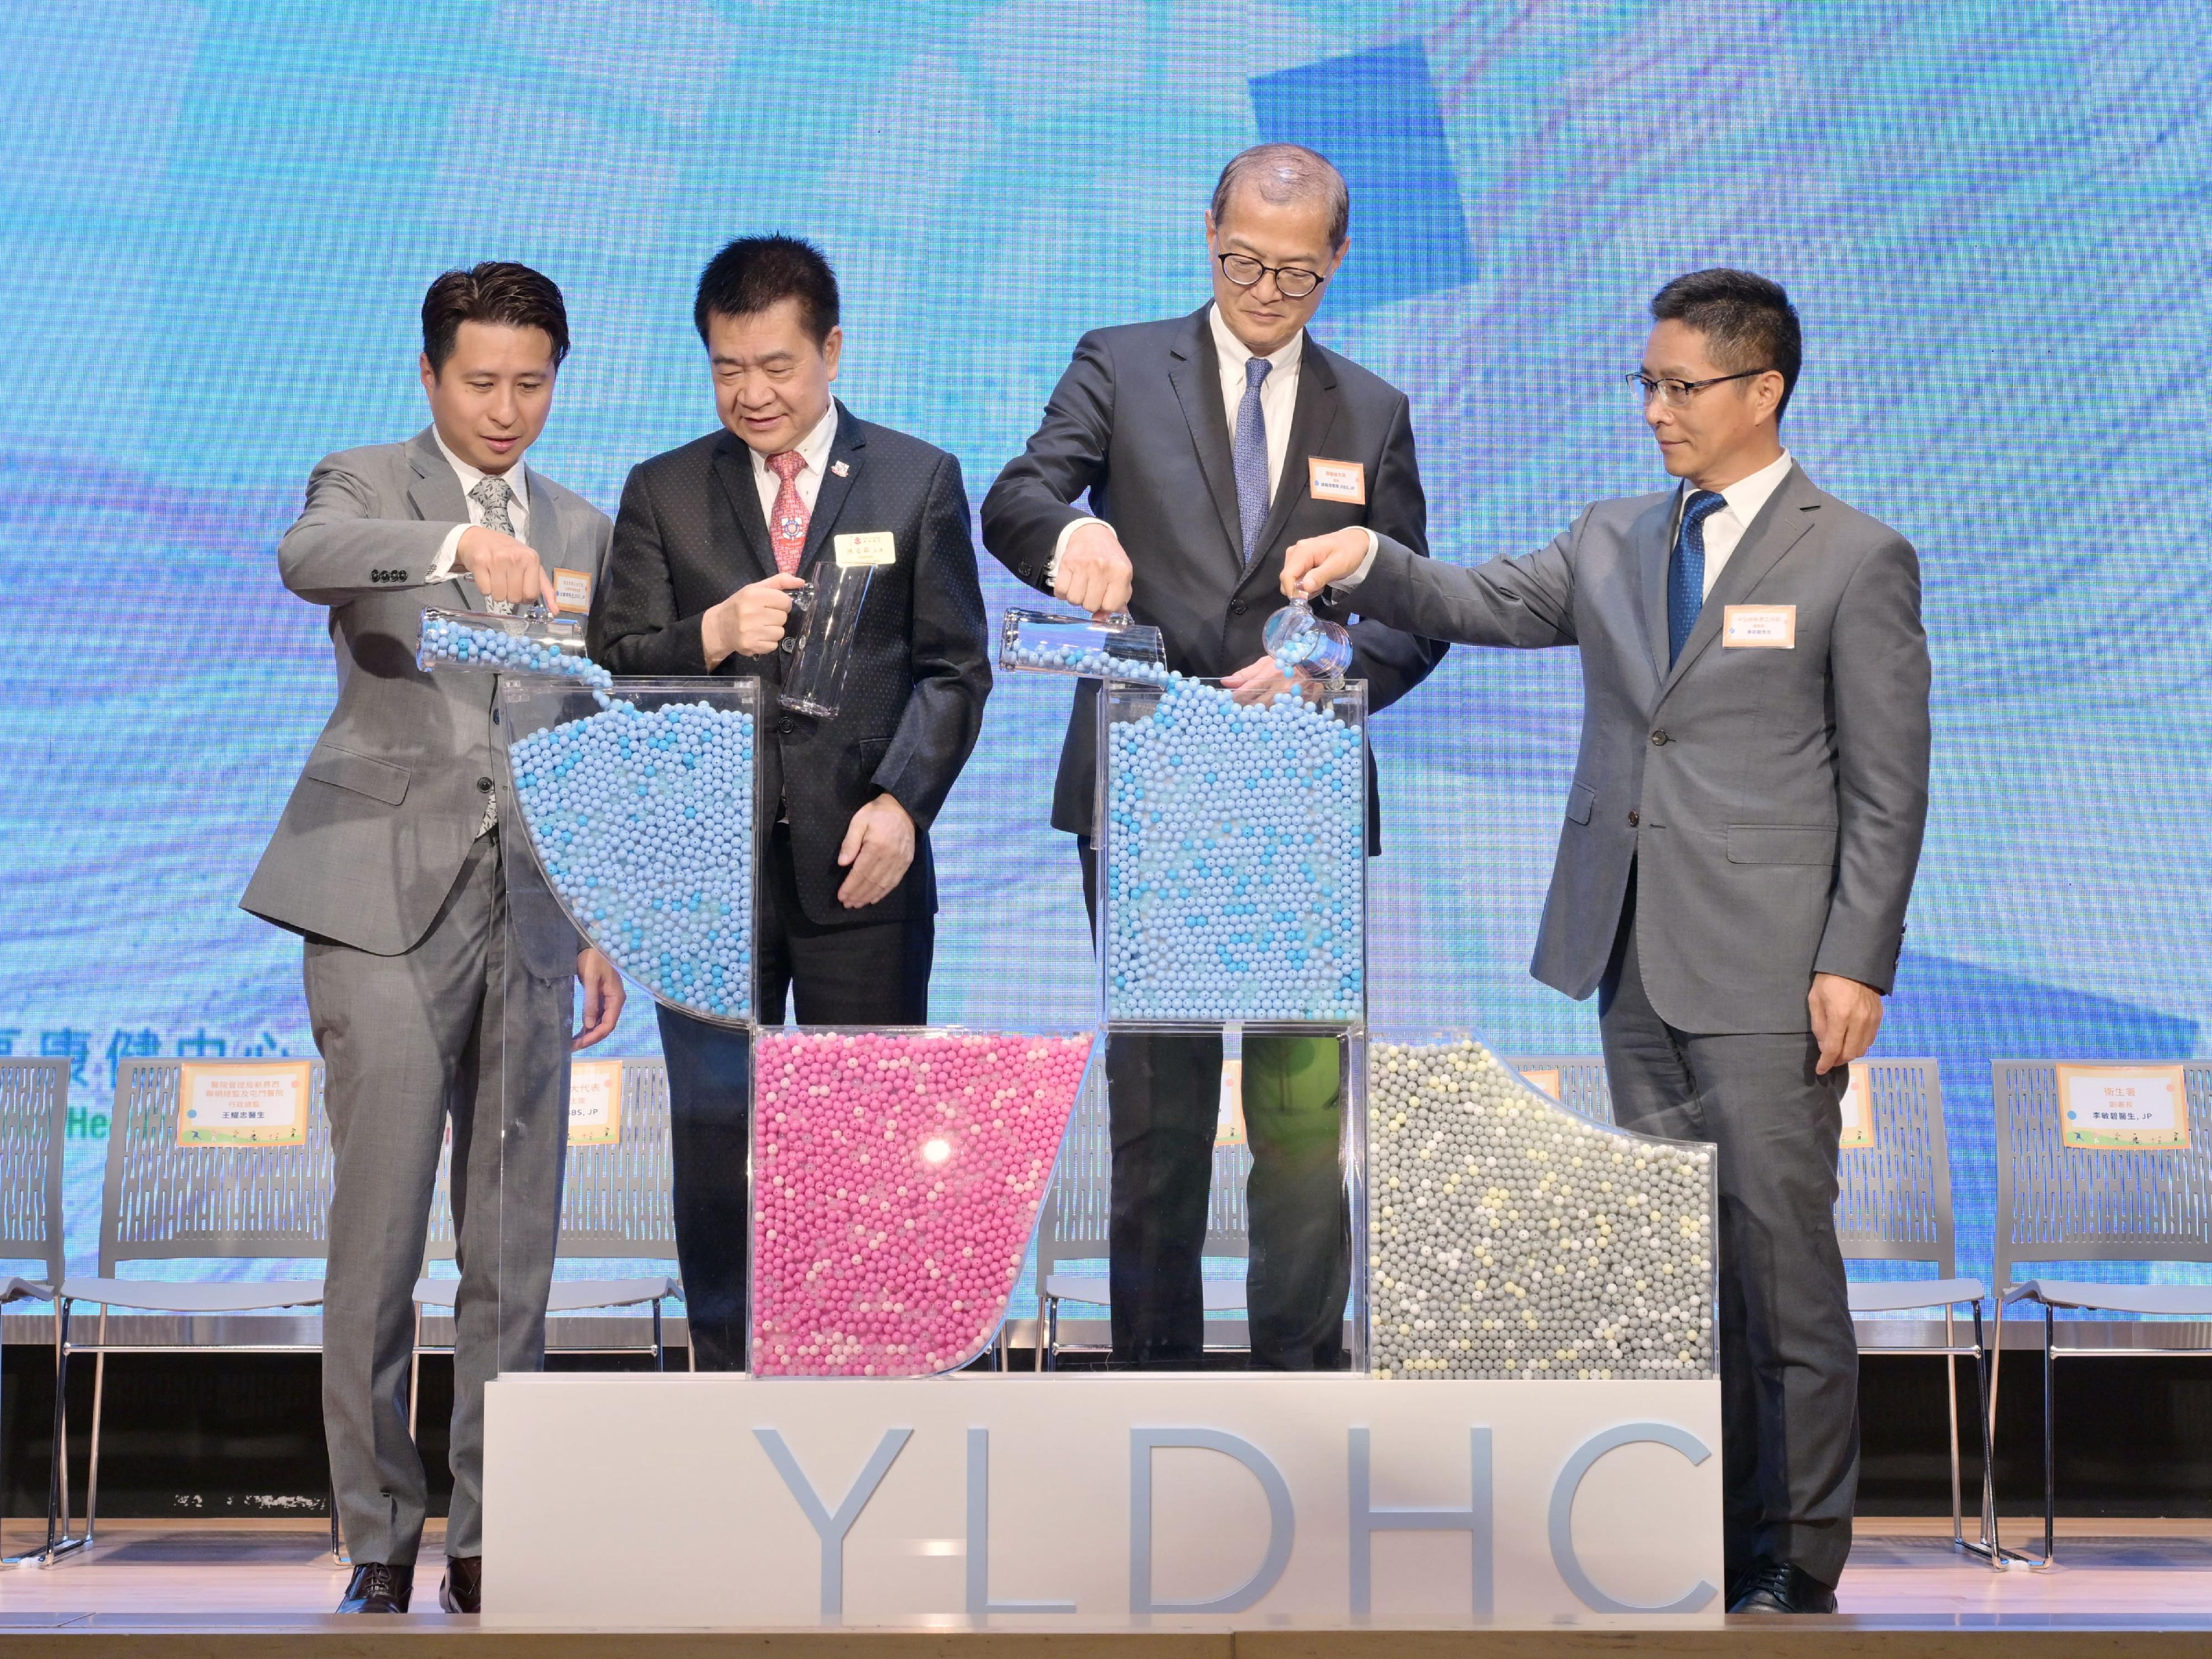 The Secretary for Health, Professor Lo Chung-mau (second right), officiates at the opening ceremony of the Yuen Long District Health Centre this morning (September 5) with the Chairman of Yuen Long District Council, Mr Shum Ho-kit (first left); the Deputy Director General of the New Territories Sub-office of the Liaison Office of the Central People's Government in the Hong Kong Special Administrative Region, Mr Li Gongxun (first right); and the Chairman of the Board of Directors of Pok Oi Hospital, Dr Chan Shou-ming (second left).